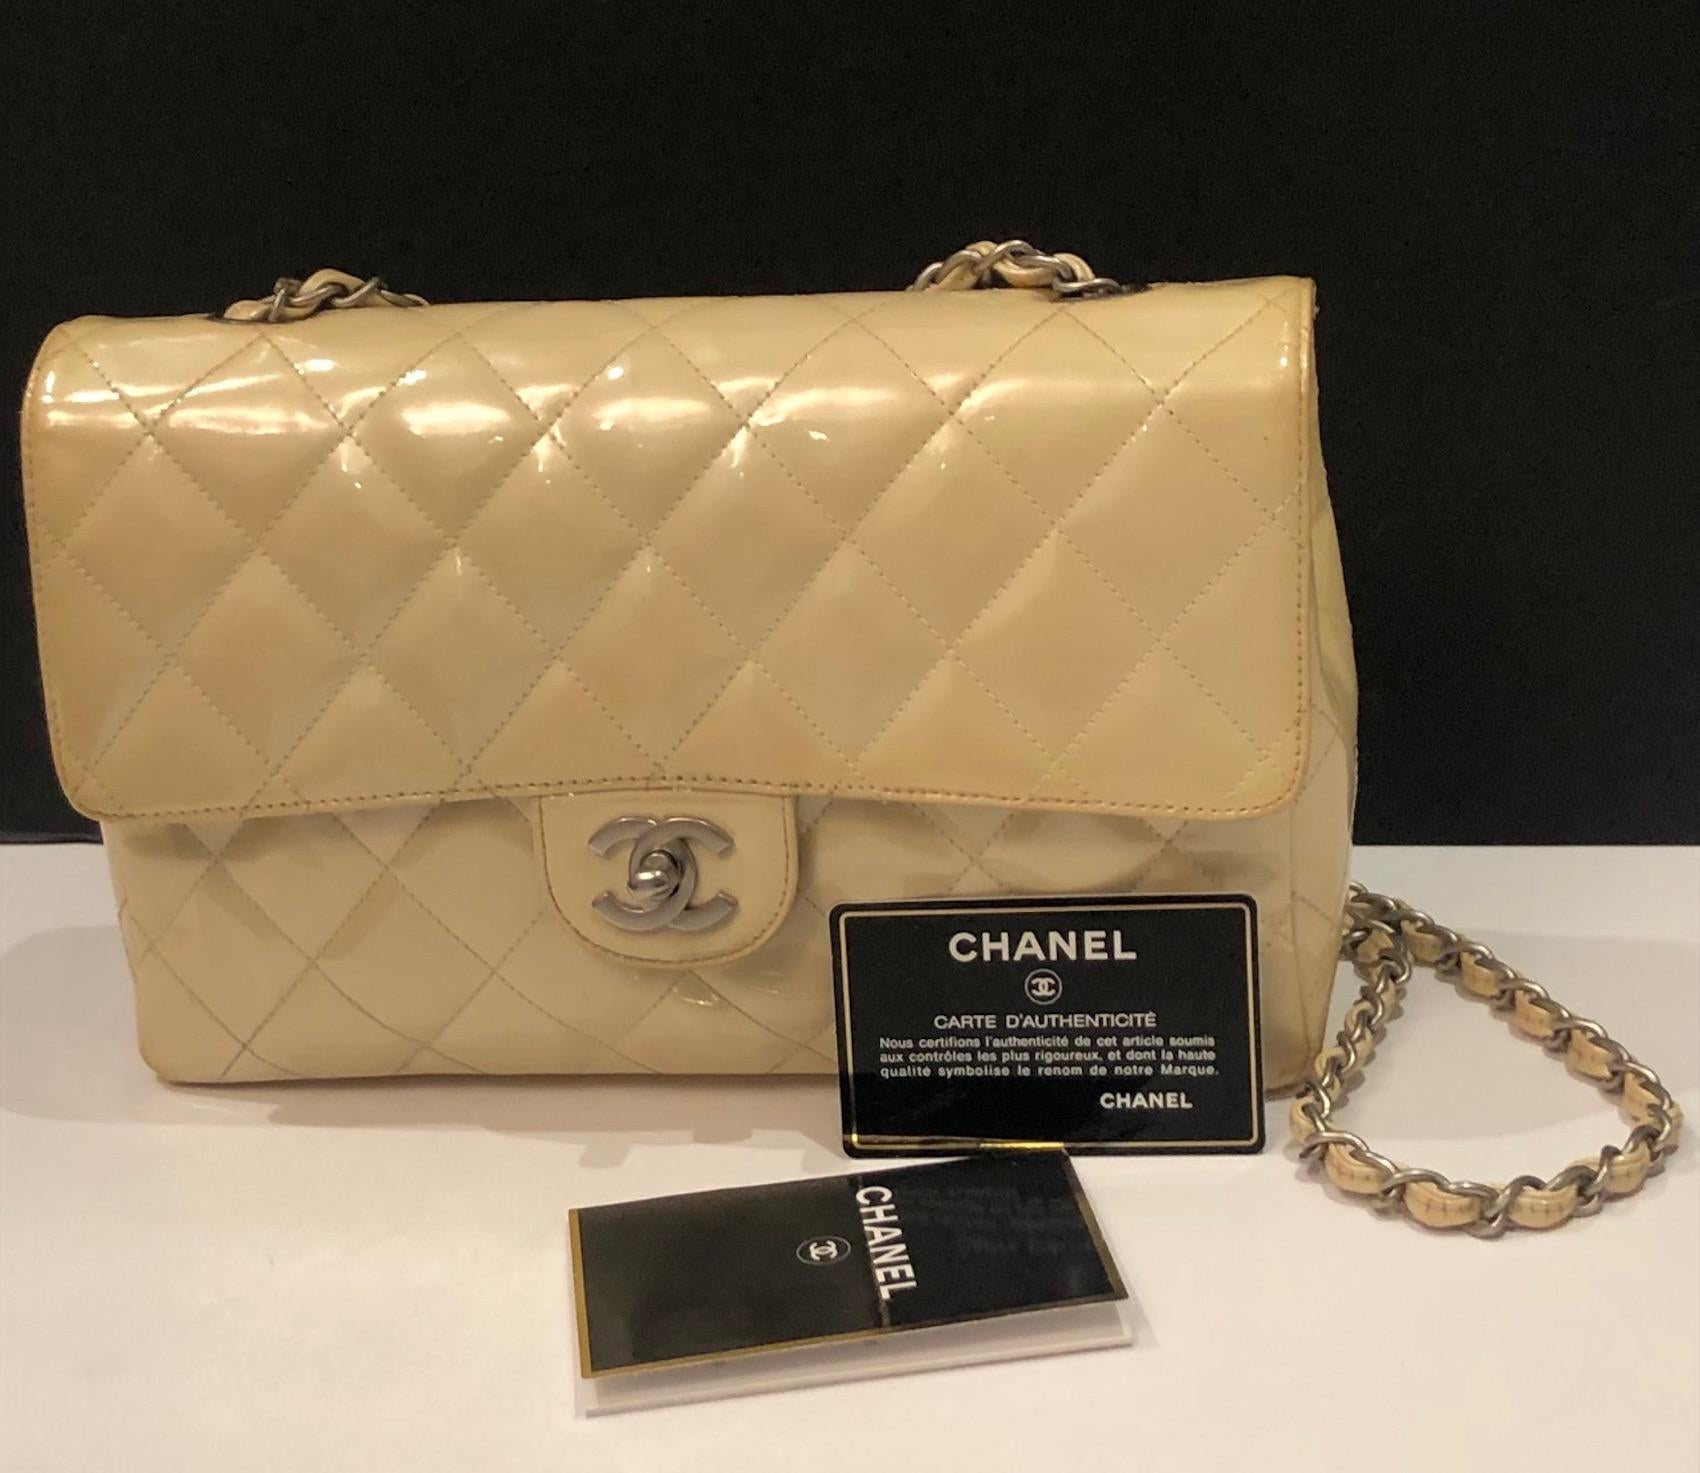 Women's CHANEL Timeless 2.55 Flap Bag Patent Leather Cream Circa 2000 For Sale